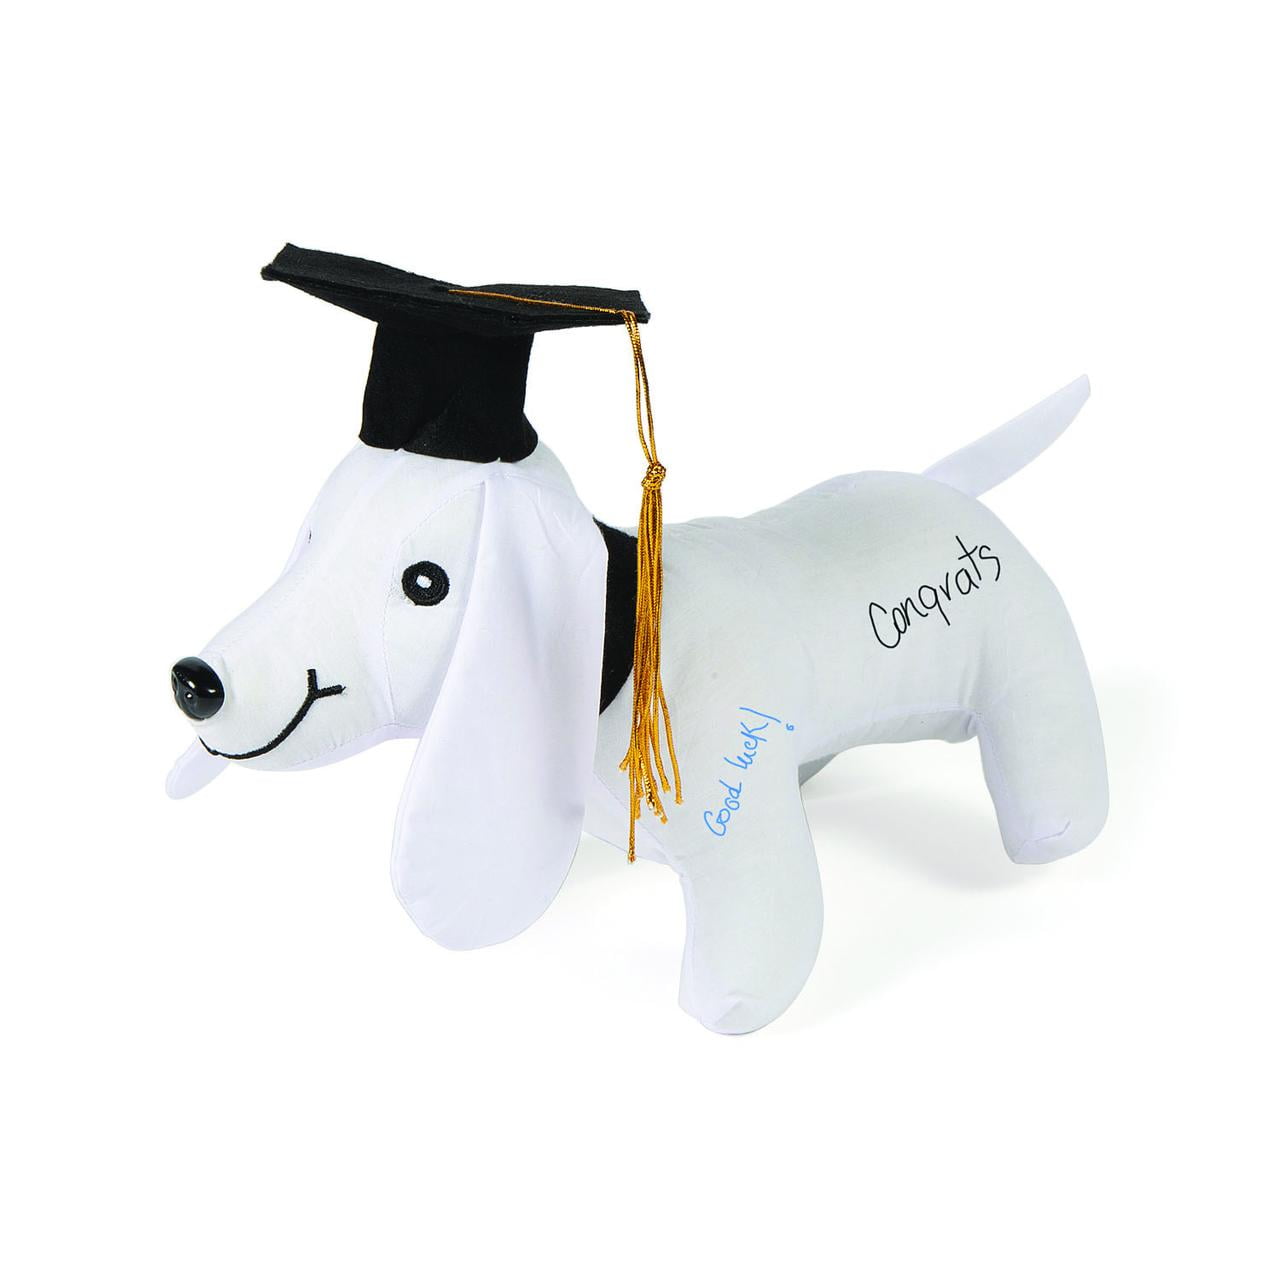 Dog Graduation Images | Free Photos, PNG Stickers, Wallpapers & Backgrounds  - rawpixel